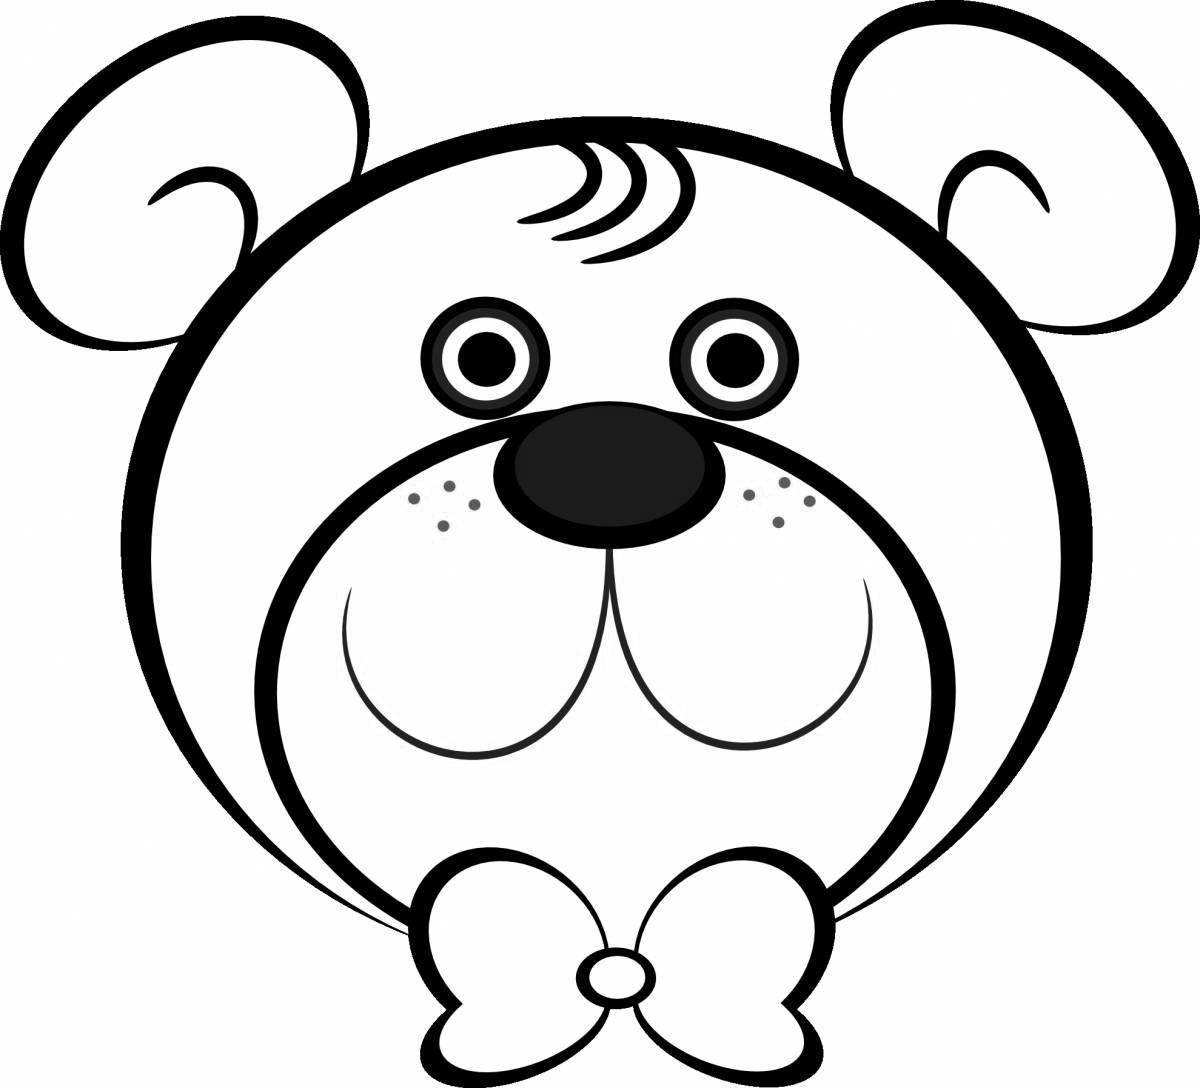 Adorable bear coloring page